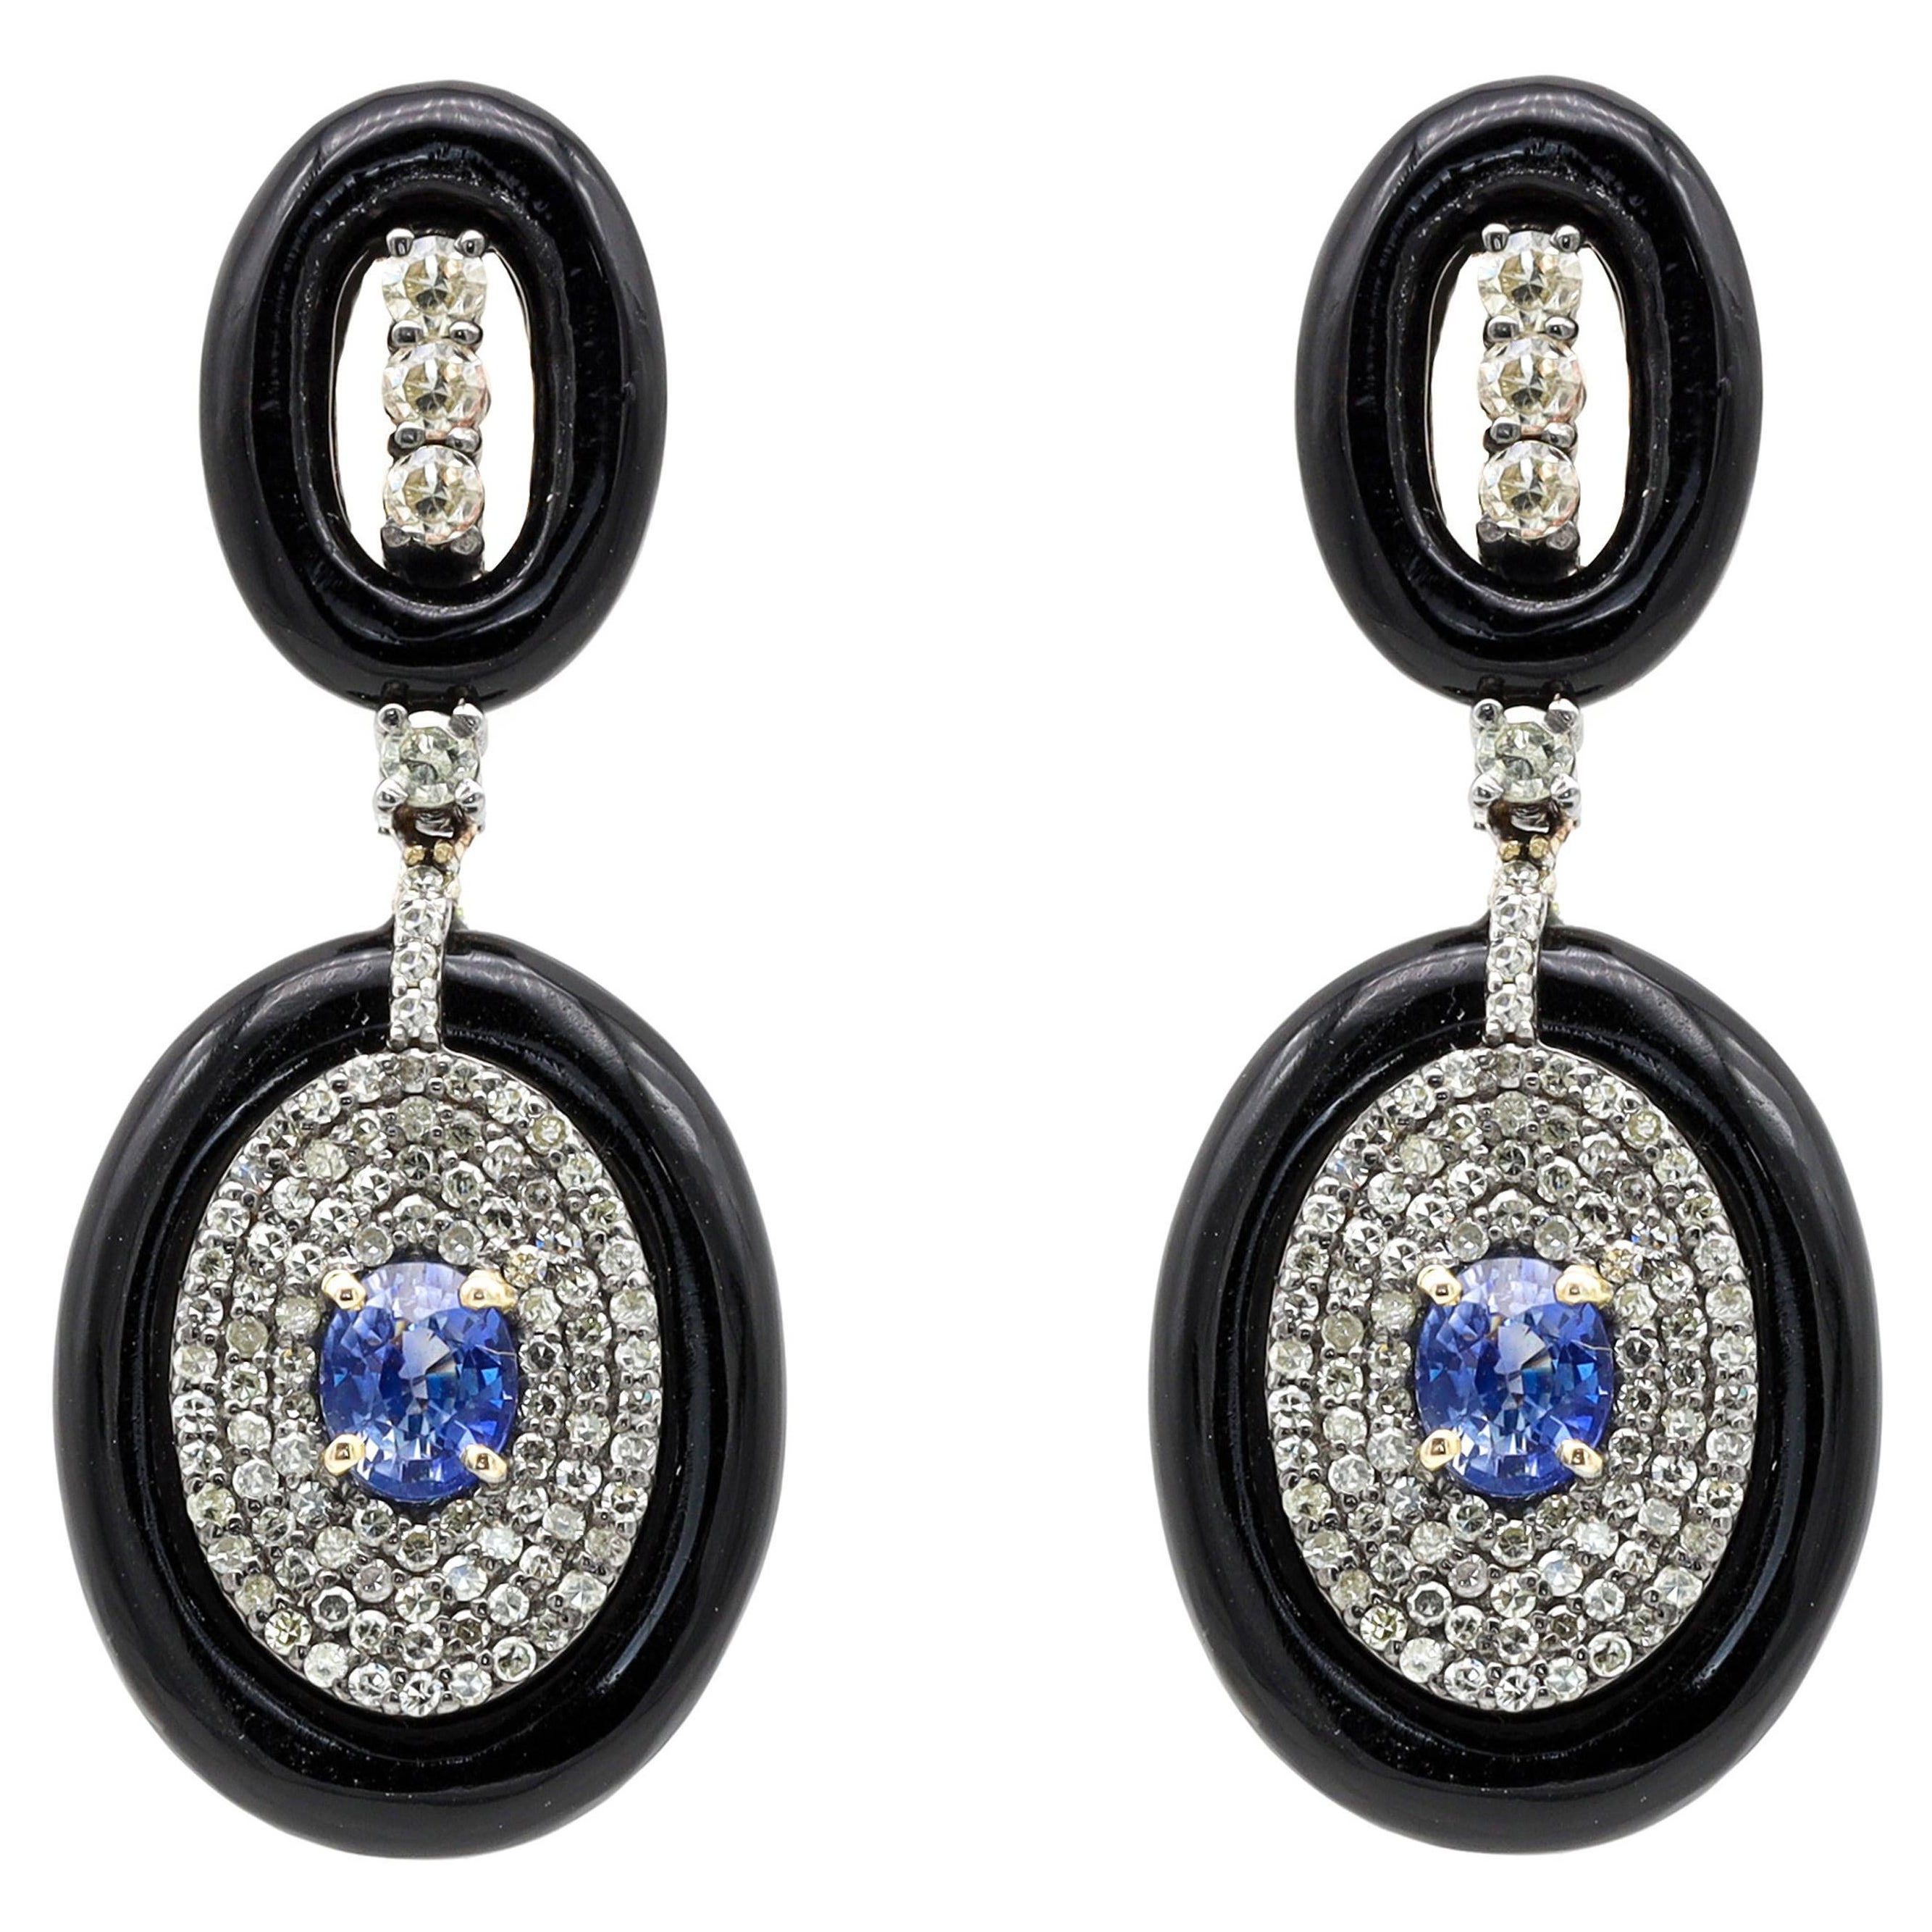 14.41 Carats Diamond, Sapphire, and Black Onyx Drop Earrings in Art-Deco Style